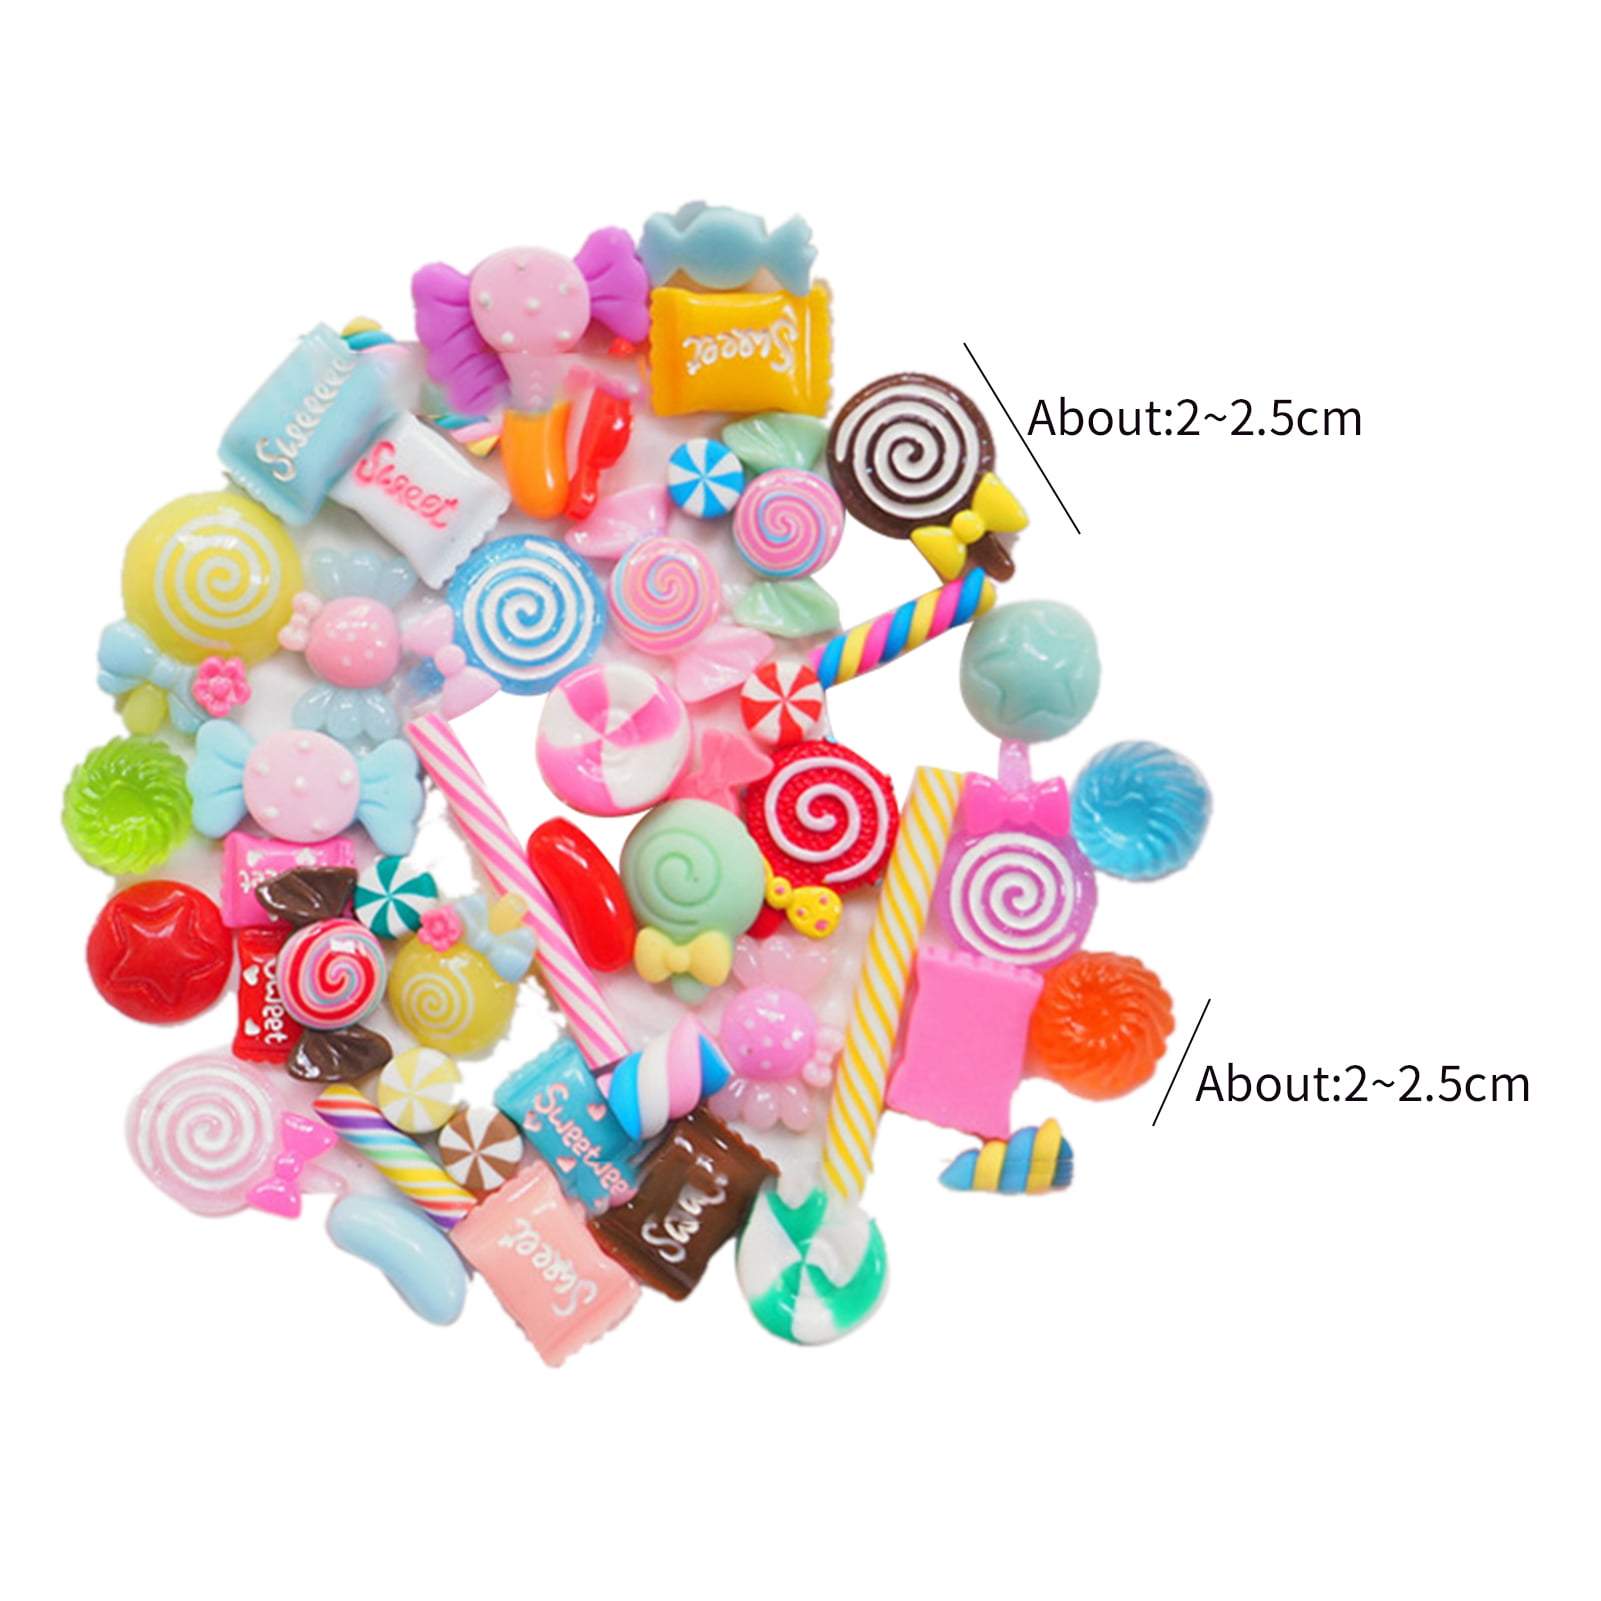 30Pcs/Lot Cute Resin Nail Art Charms Happy Animals Jelly Gummy Sweet Candy  3D Nail Decoration DIY Nail Accessories (30pcs, Mix Shape)